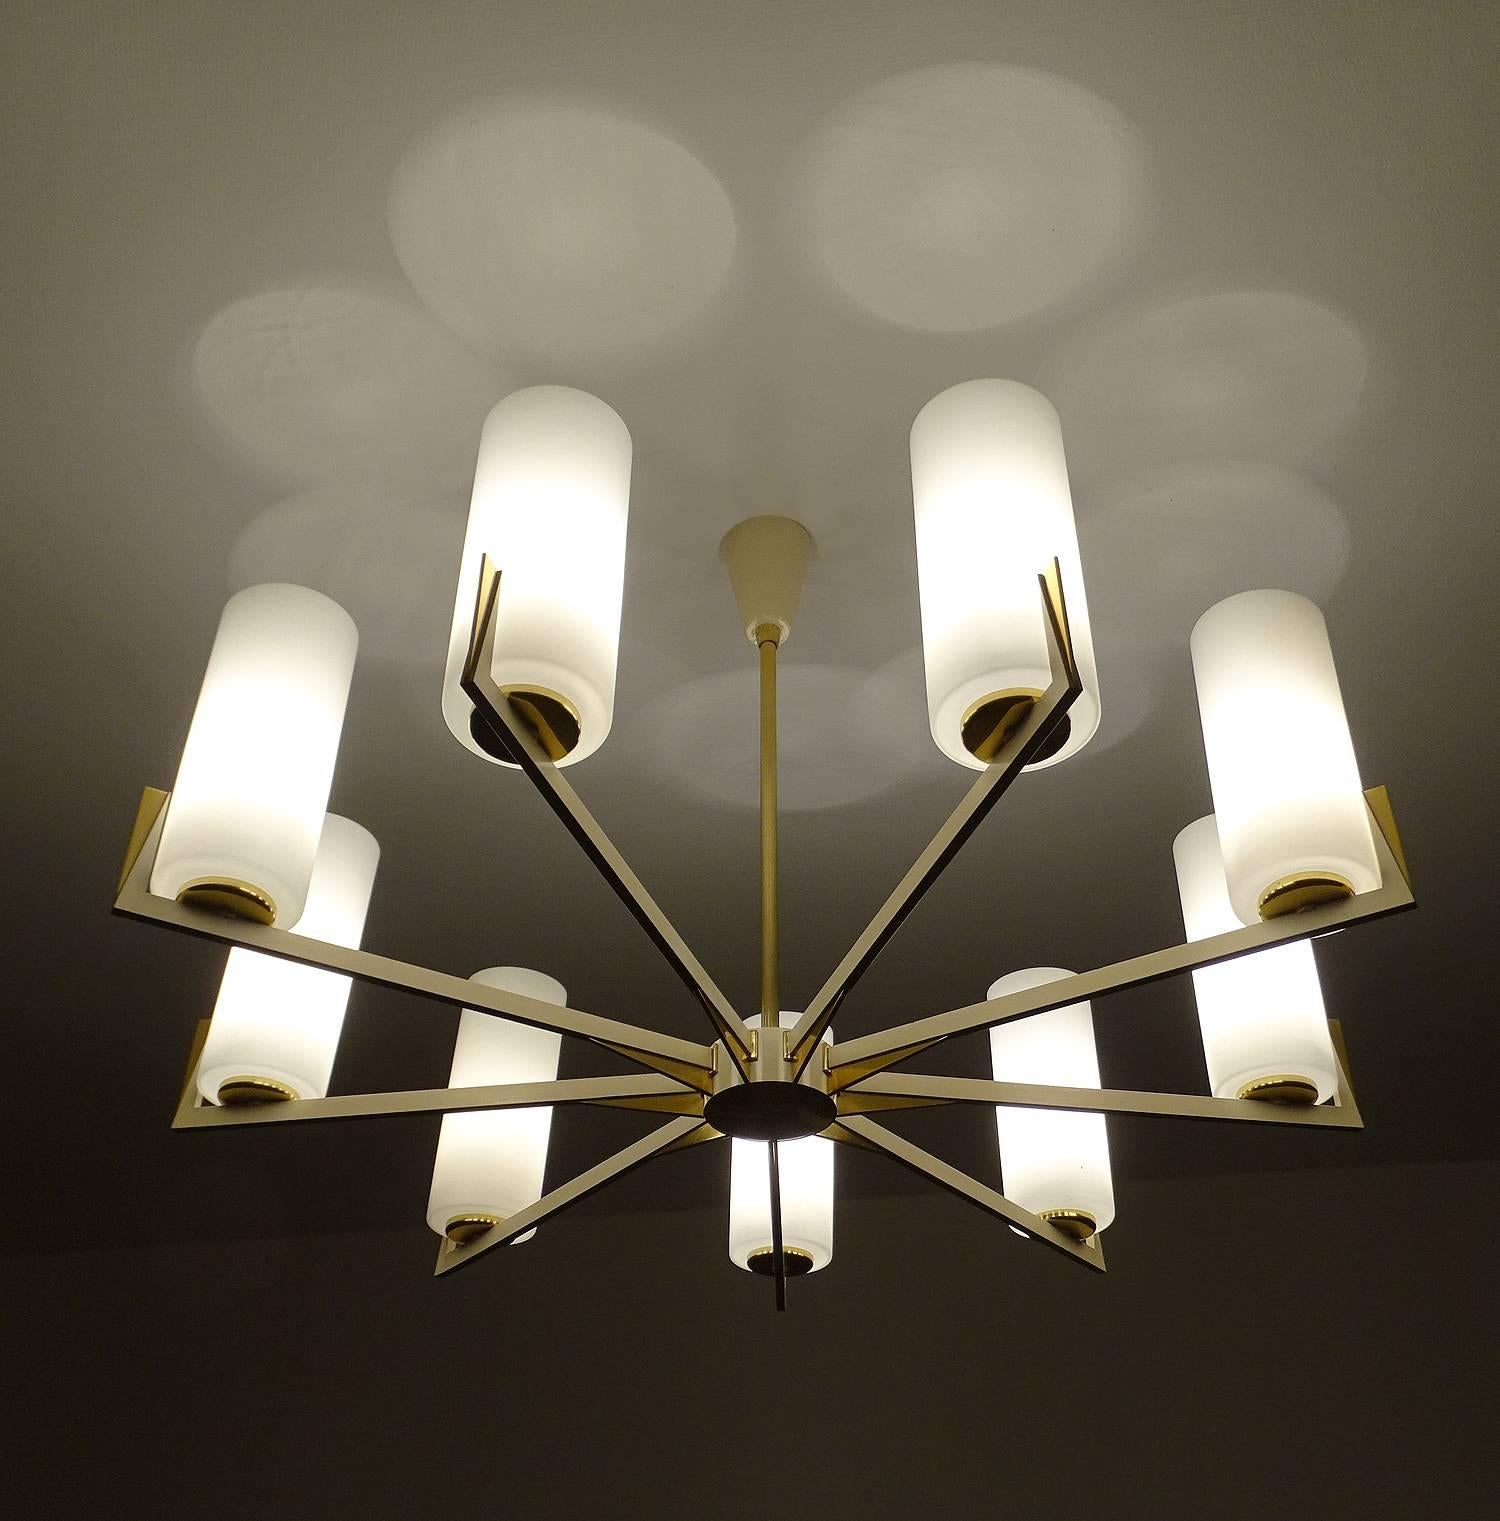 Very large sunburst chandelier in the manner of Arredoluce, 1950s , brass and cream white lacquered metal, finish, unusually large opaline glass diffusers. High end all brass quality.

Nine standard bulbs @ 60 watts each, - LED compatible - runs